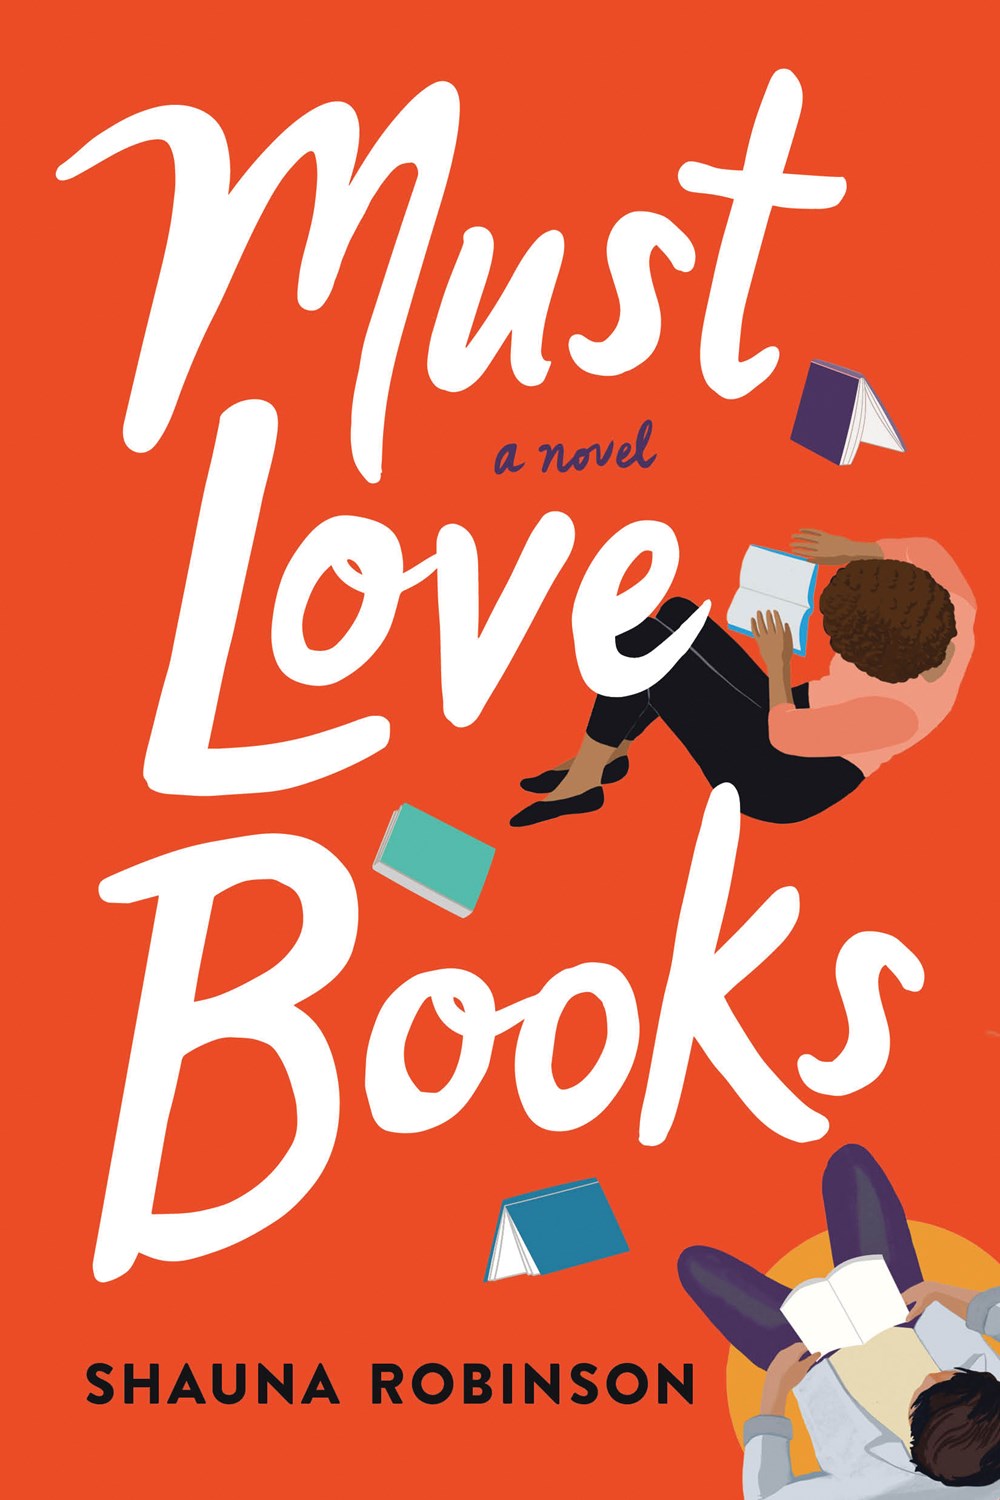 Must Love Books by Shauna Robinson (Book Chat Pick)